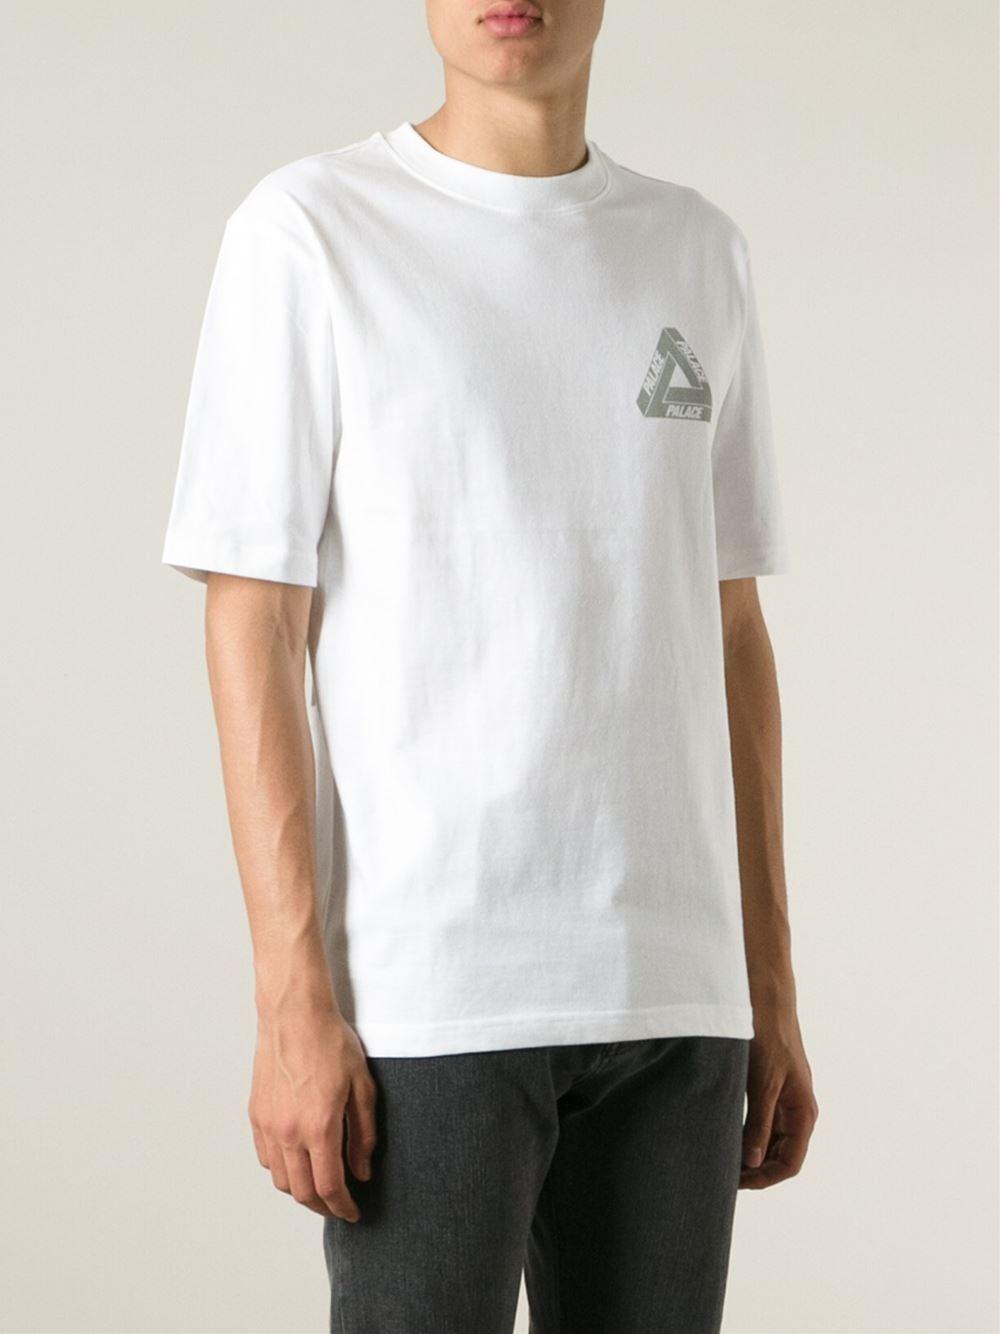 Palace Logo Print T-Shirt in White for Men - Lyst